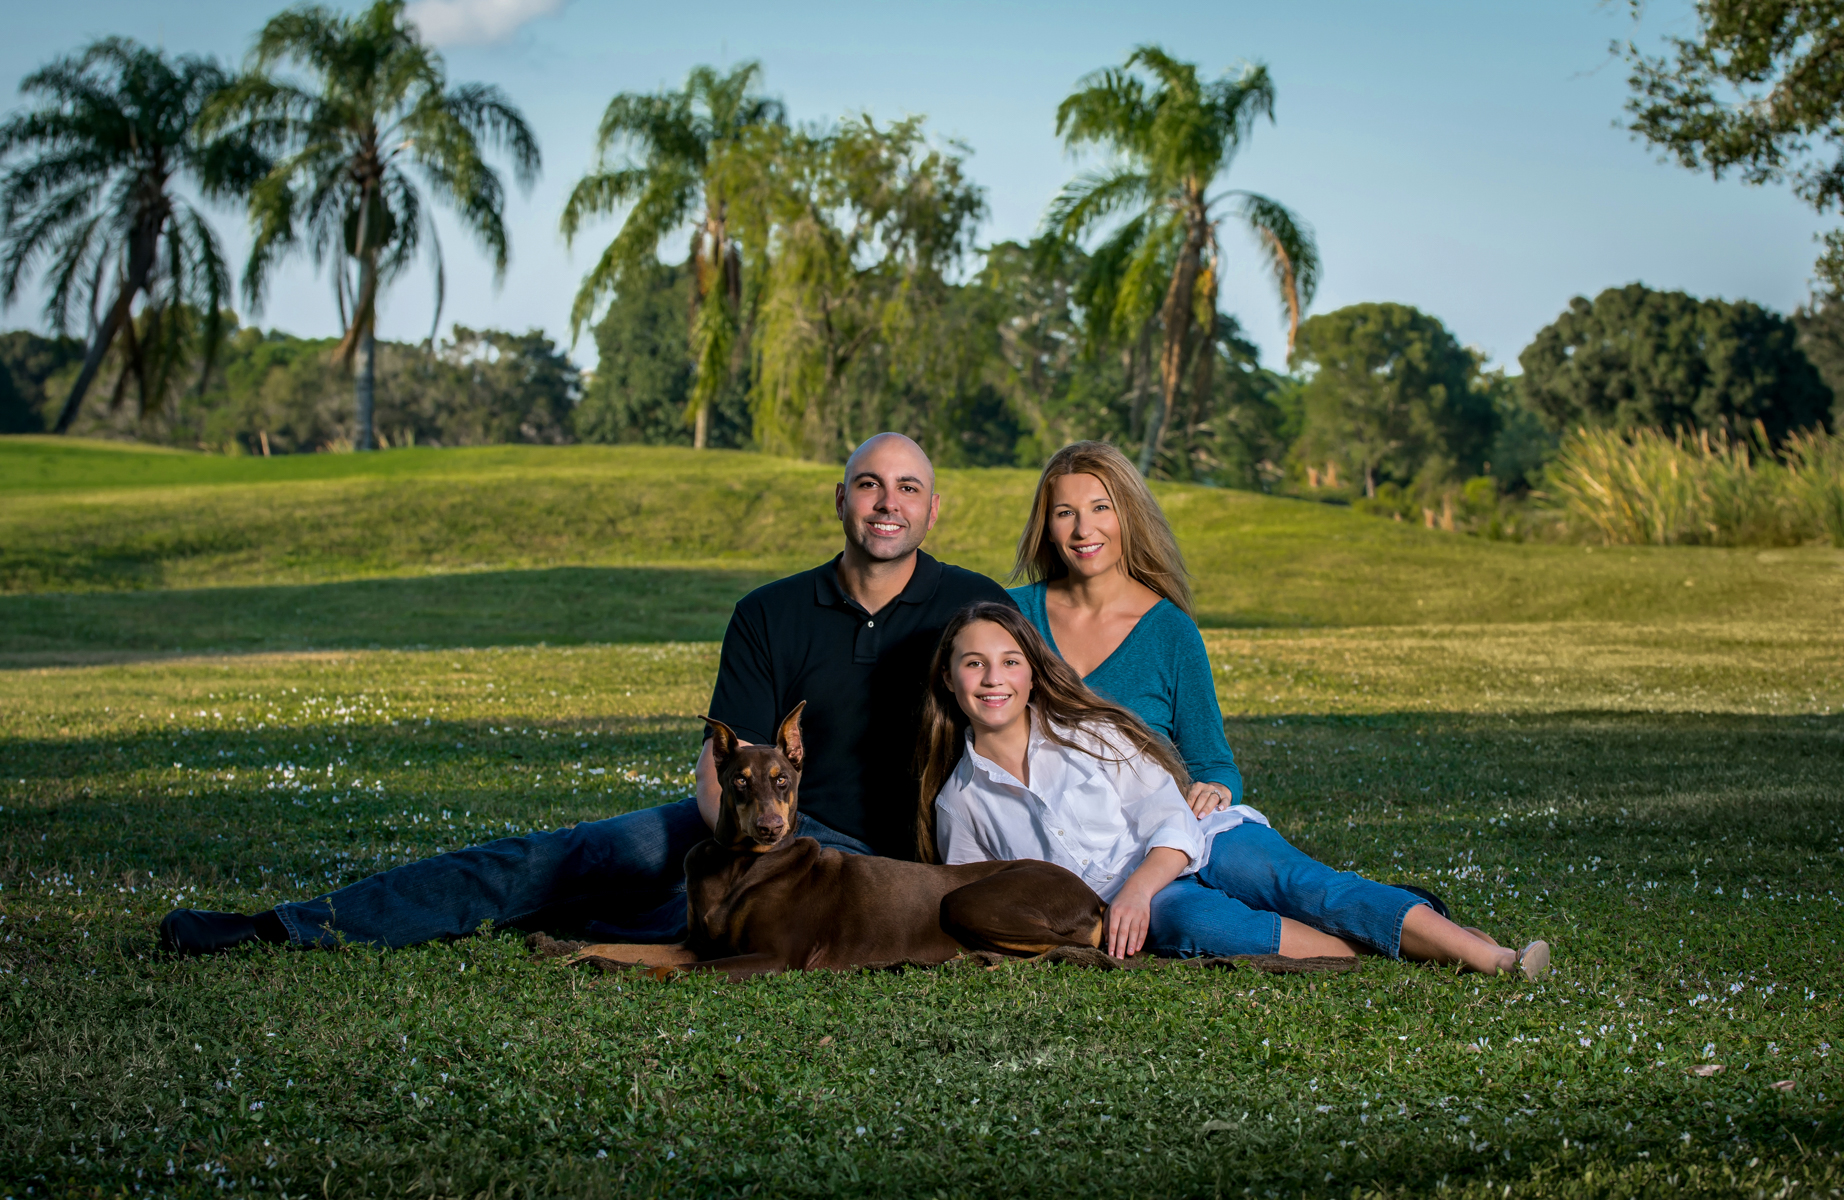 Unique location sessions for family portraits. Call us at 561-307-9875.